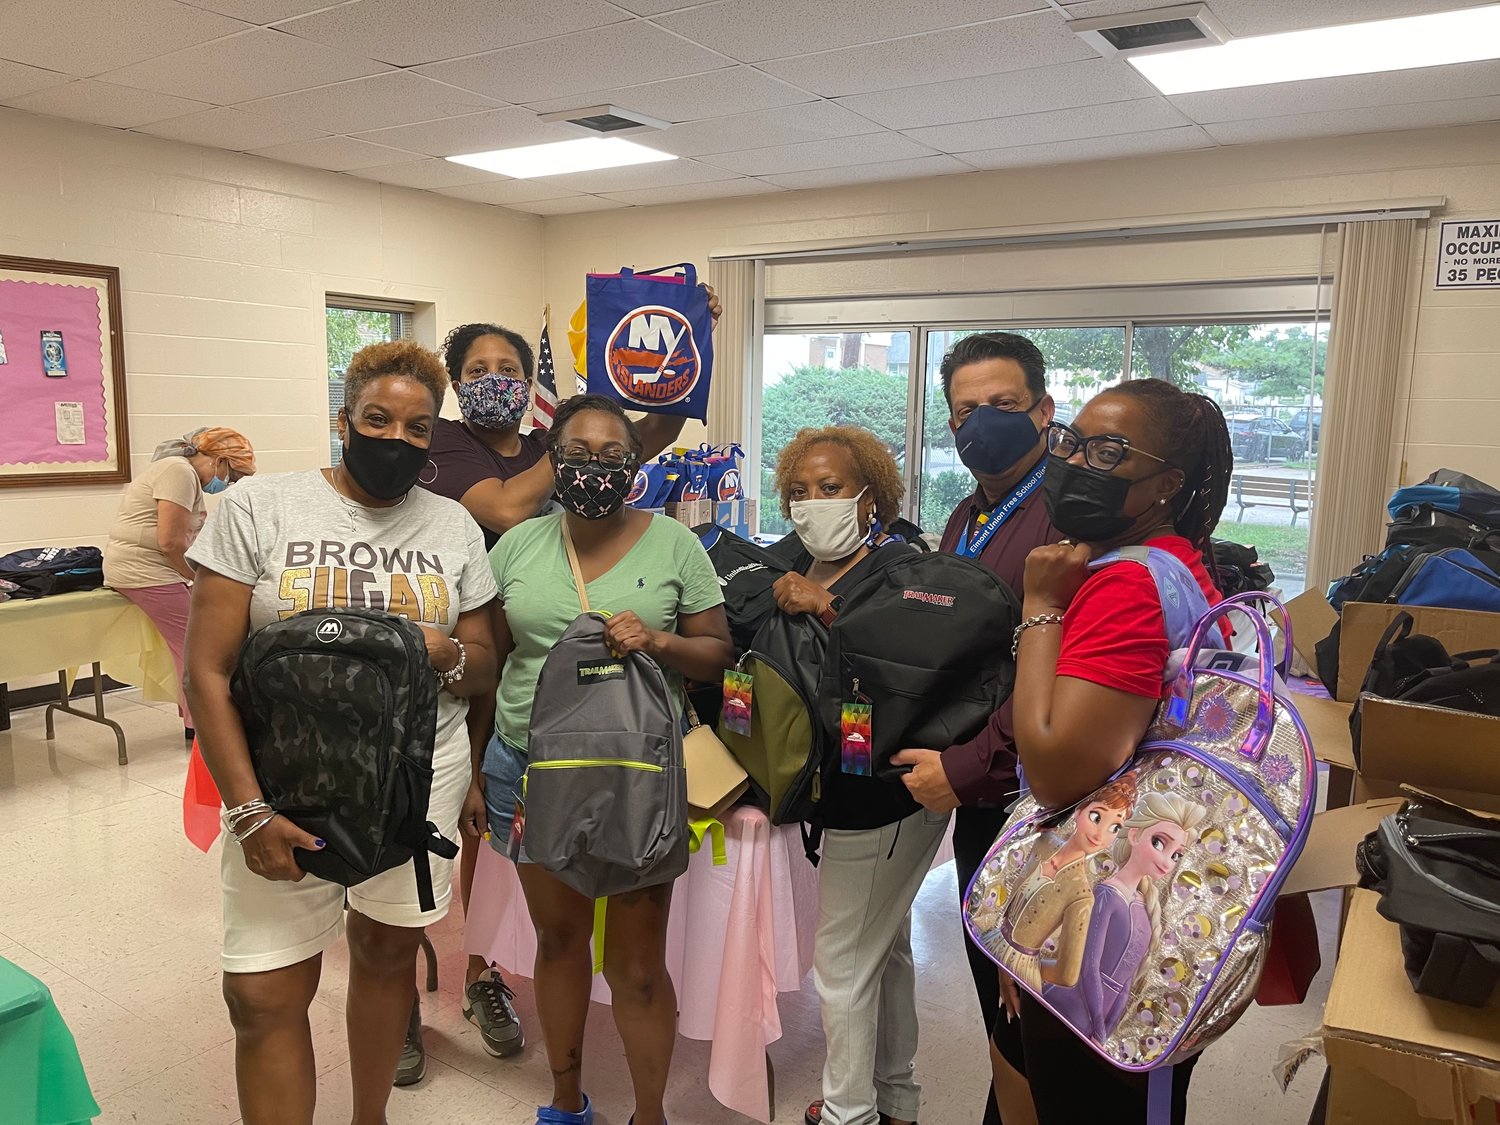 Claudine Hall, pictured third from right preparing for last year’s backpack giveaway, said the goal of the annual program is to serve local students and families from all the schools and areas in Elmont.